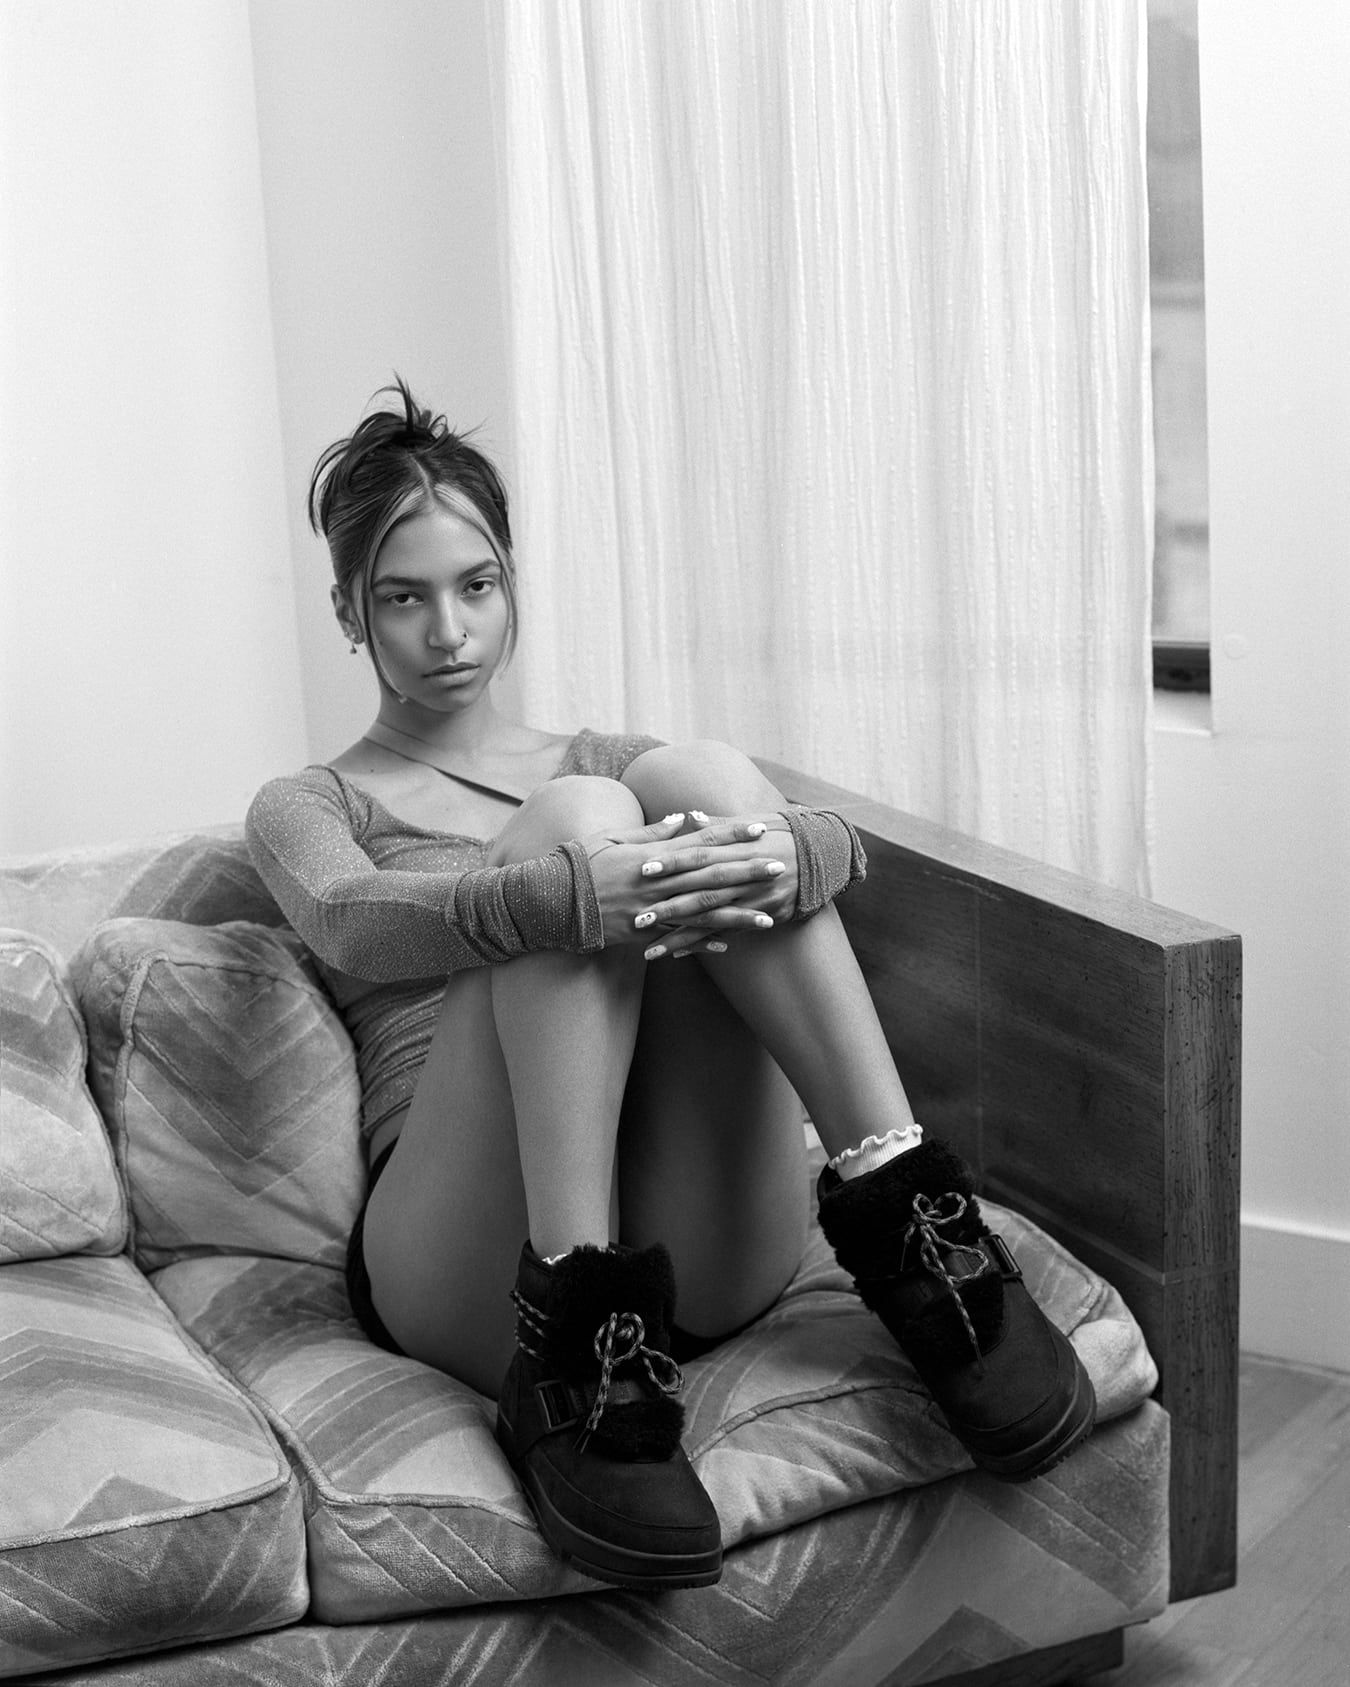 Black and white photo featuring Tara Raani a queer model and actress, know for her role as Zaara Ali on the television sitcom grown-ish. Wearing an oversized sweatshirt, sitting on a 70's sofa, in the background a window with a curtain. Hair in a bun by hairstylist Jason Linkow, photographed by New York fashion photographer Maria Bruun. Photographed using the Mamiya RZ67 camera and Ilford film. Editorial for Flanelle Magazine.